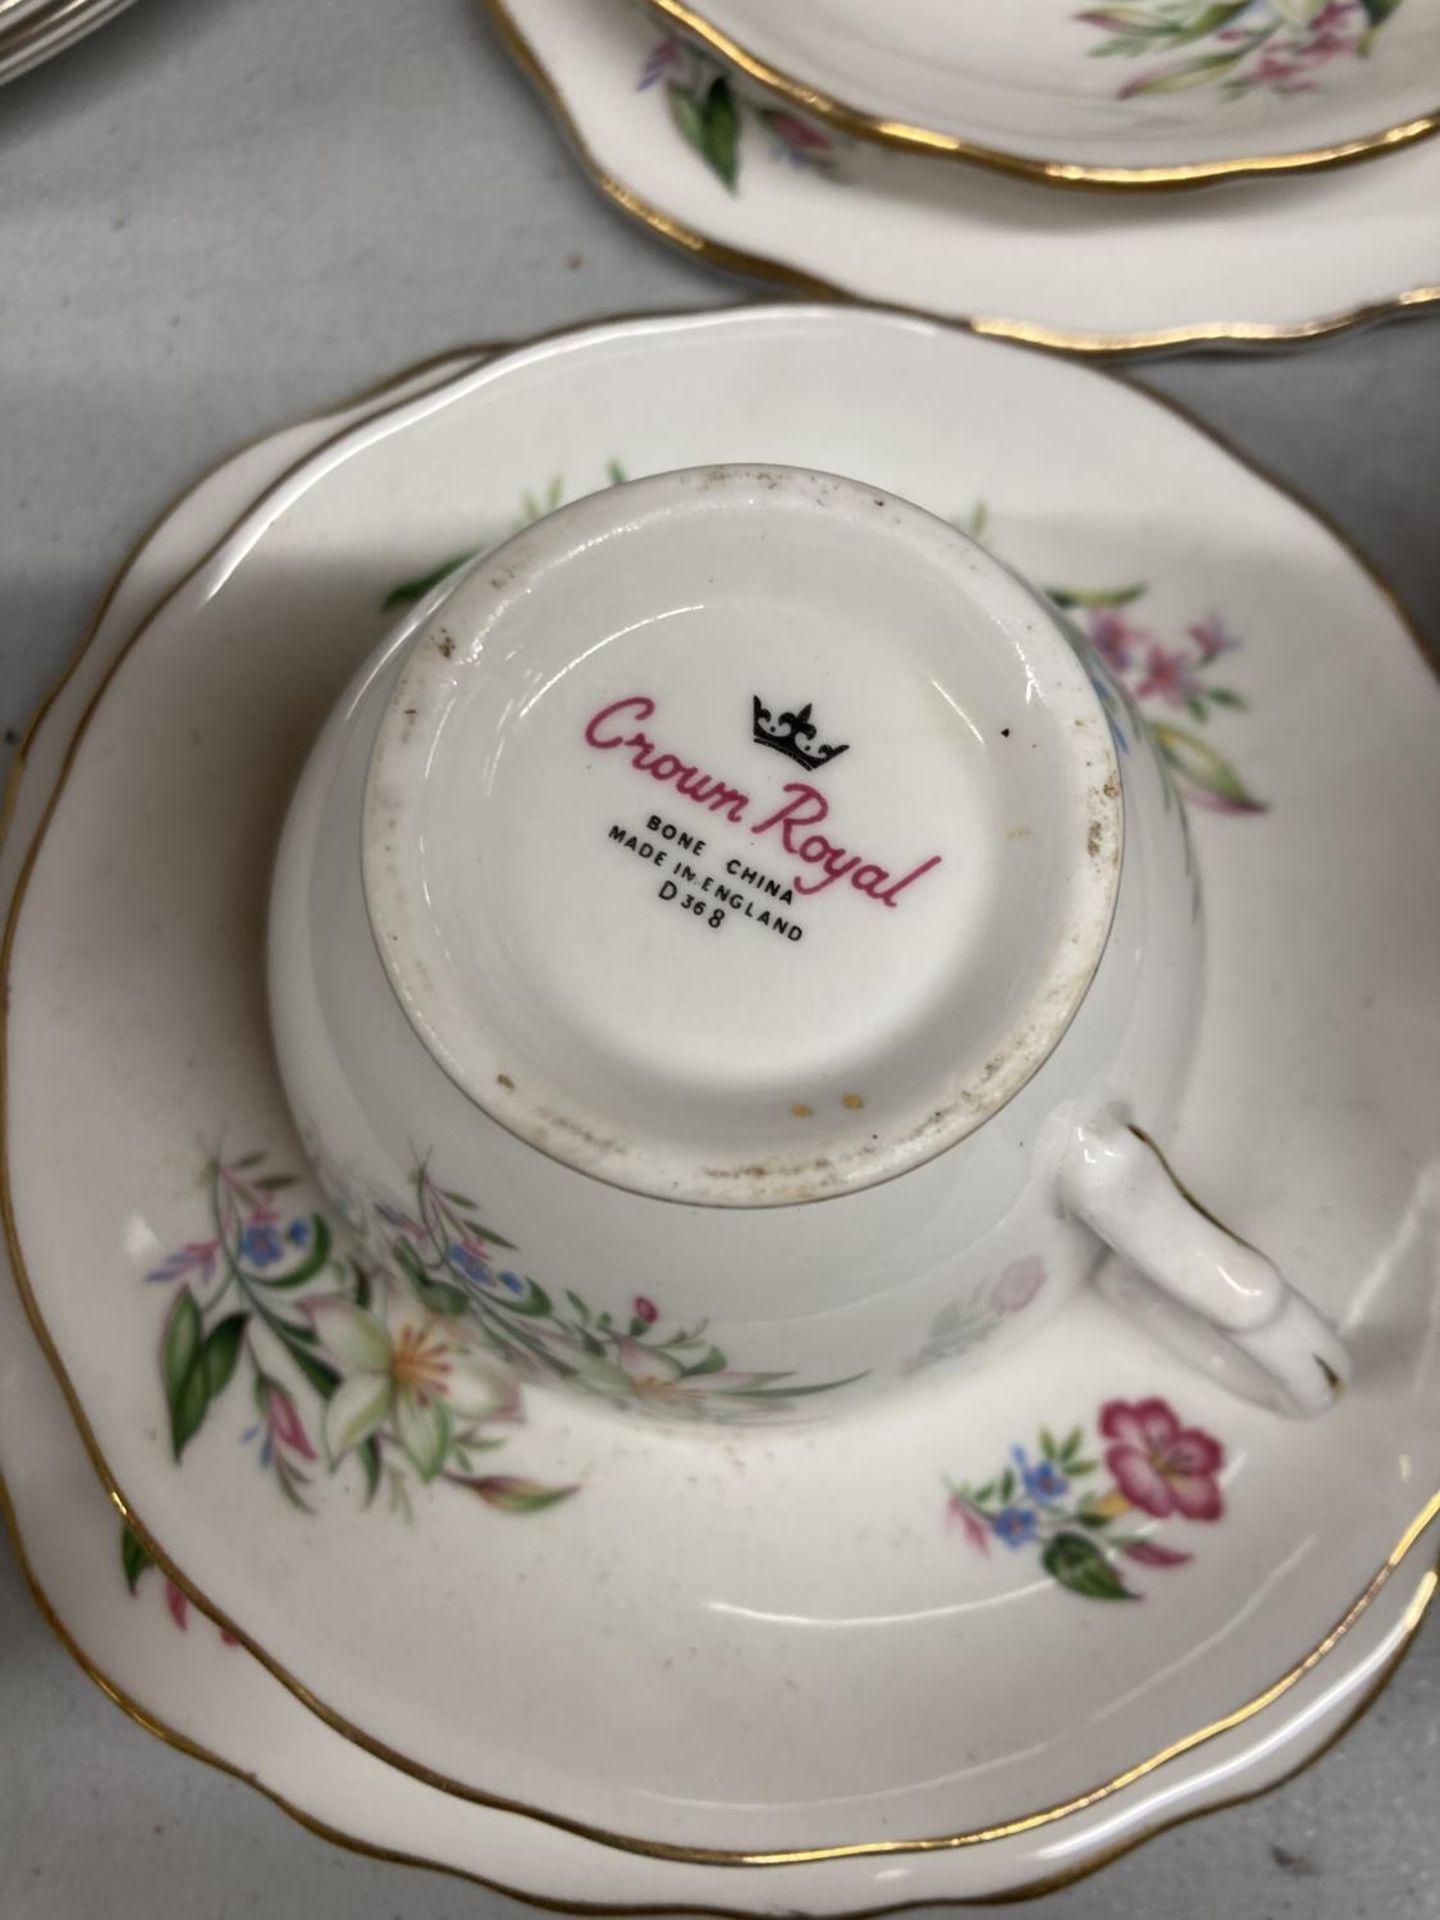 A QUANTITY OF CHINA TEACUPS, SAUCERS, PLATES, ETC TO INCLUDE ROYALE DOULTON 'PASTORALE', CROWN - Image 5 of 5